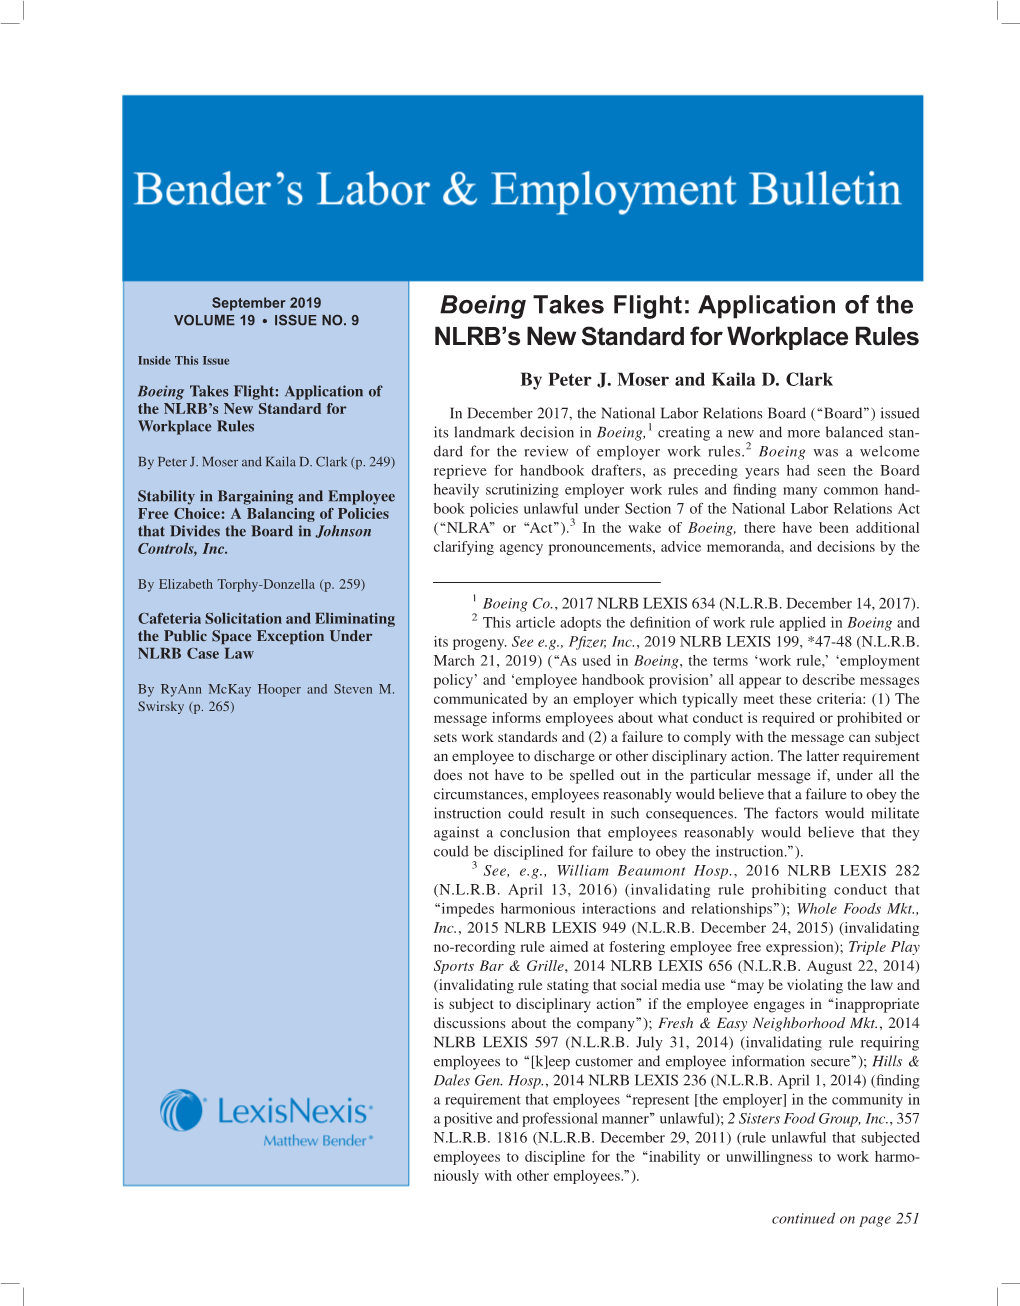 Boeing Takes Flight: Application of the NLRB's New Standard For